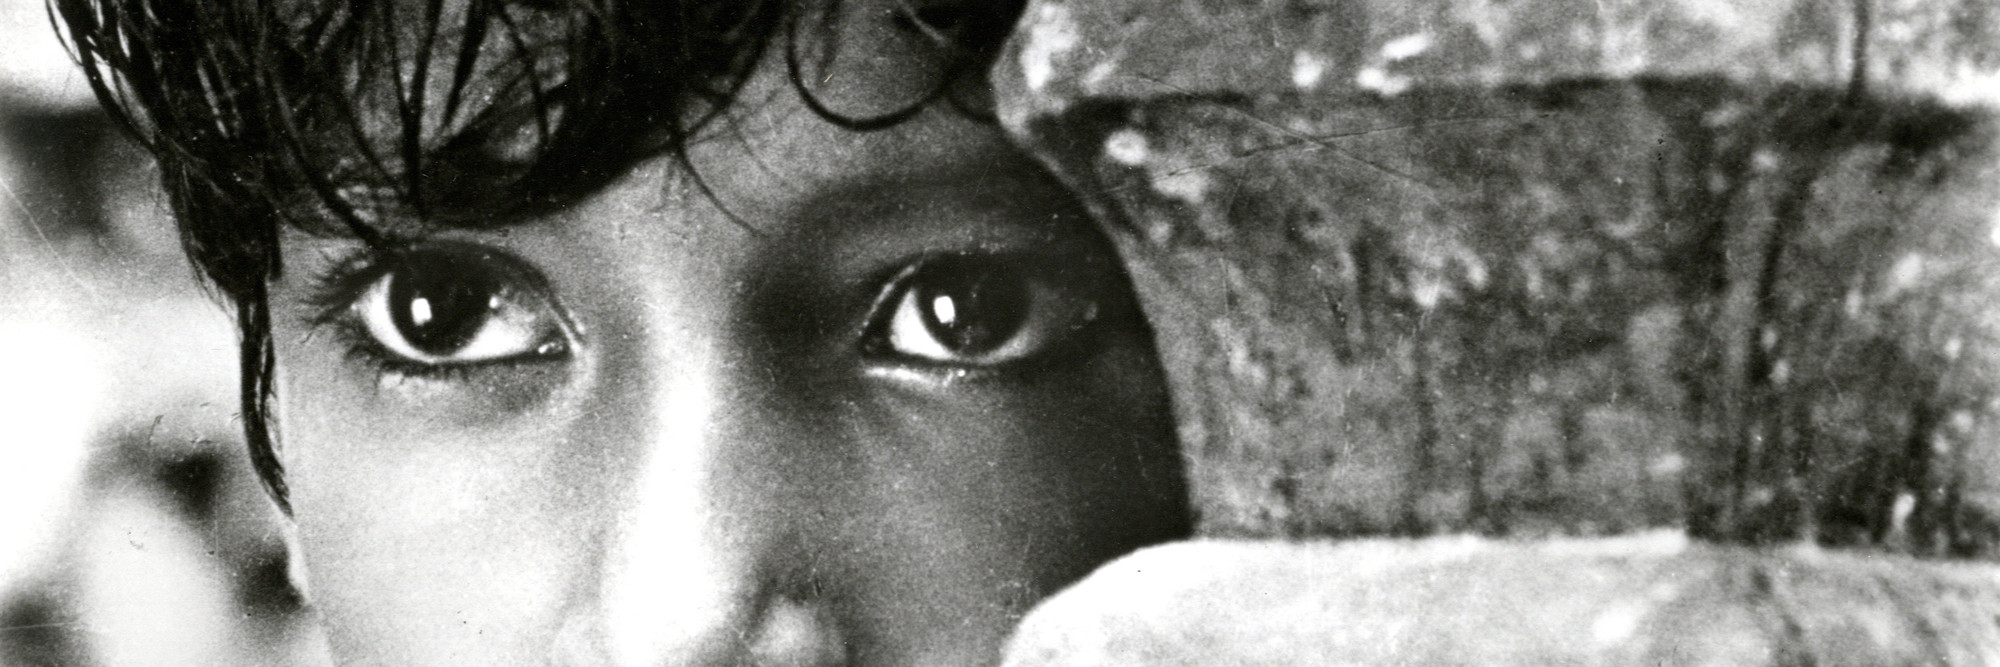 Pather Panchali. 1955. India. Written and directed by Satyajit Ray